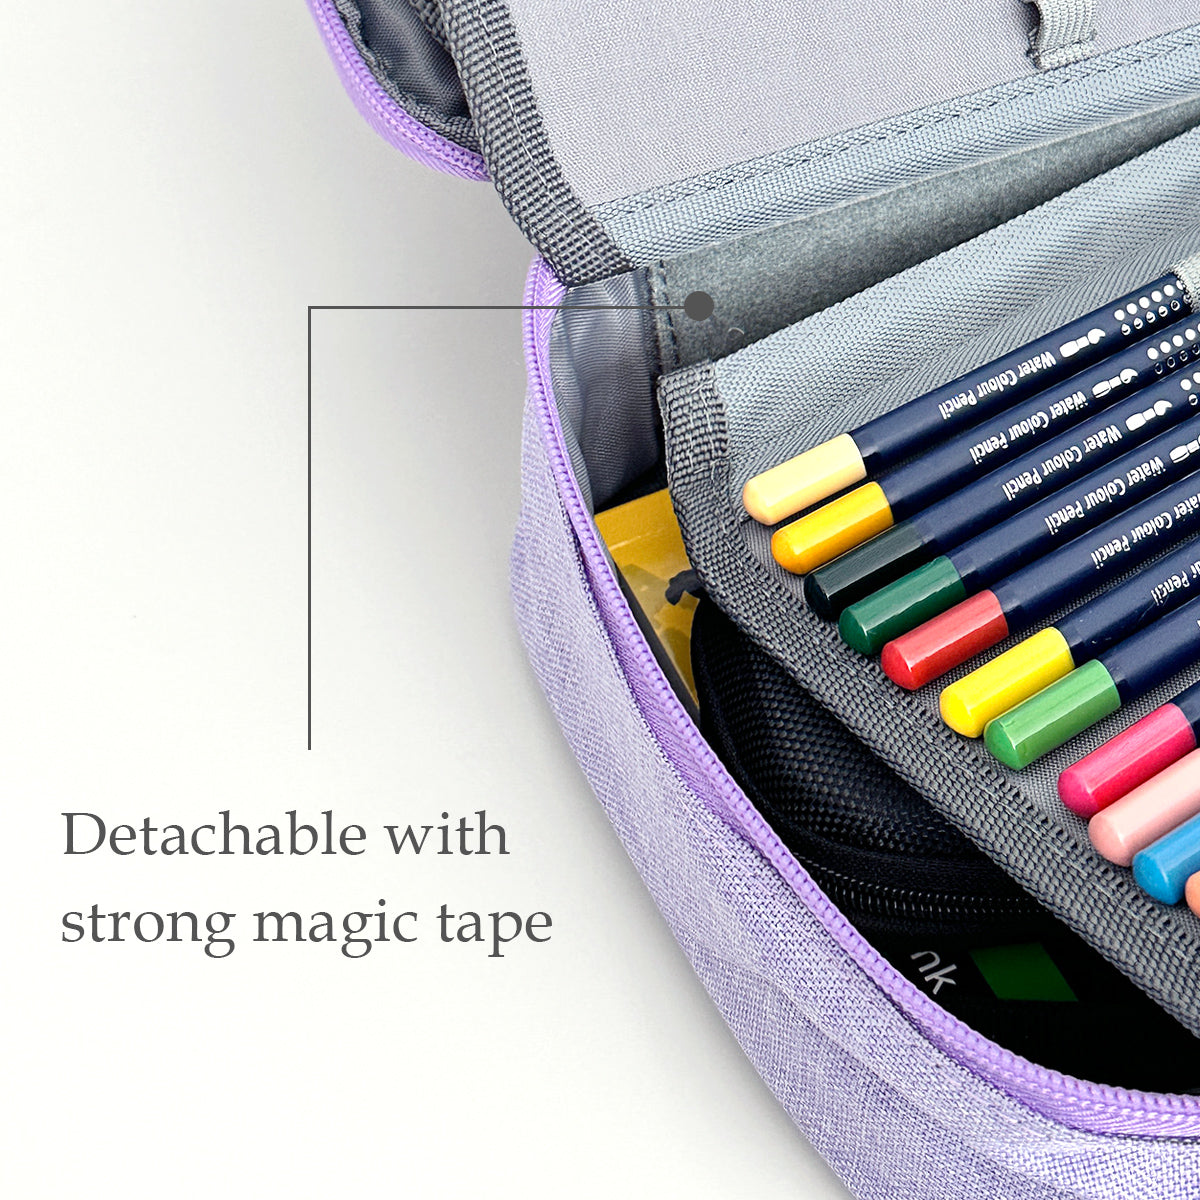 Wrapables Large Capacity 72 Slot Pencil Case for Colored Pencils,  Stationery Pouch, Black, 1 Piece - Foods Co.